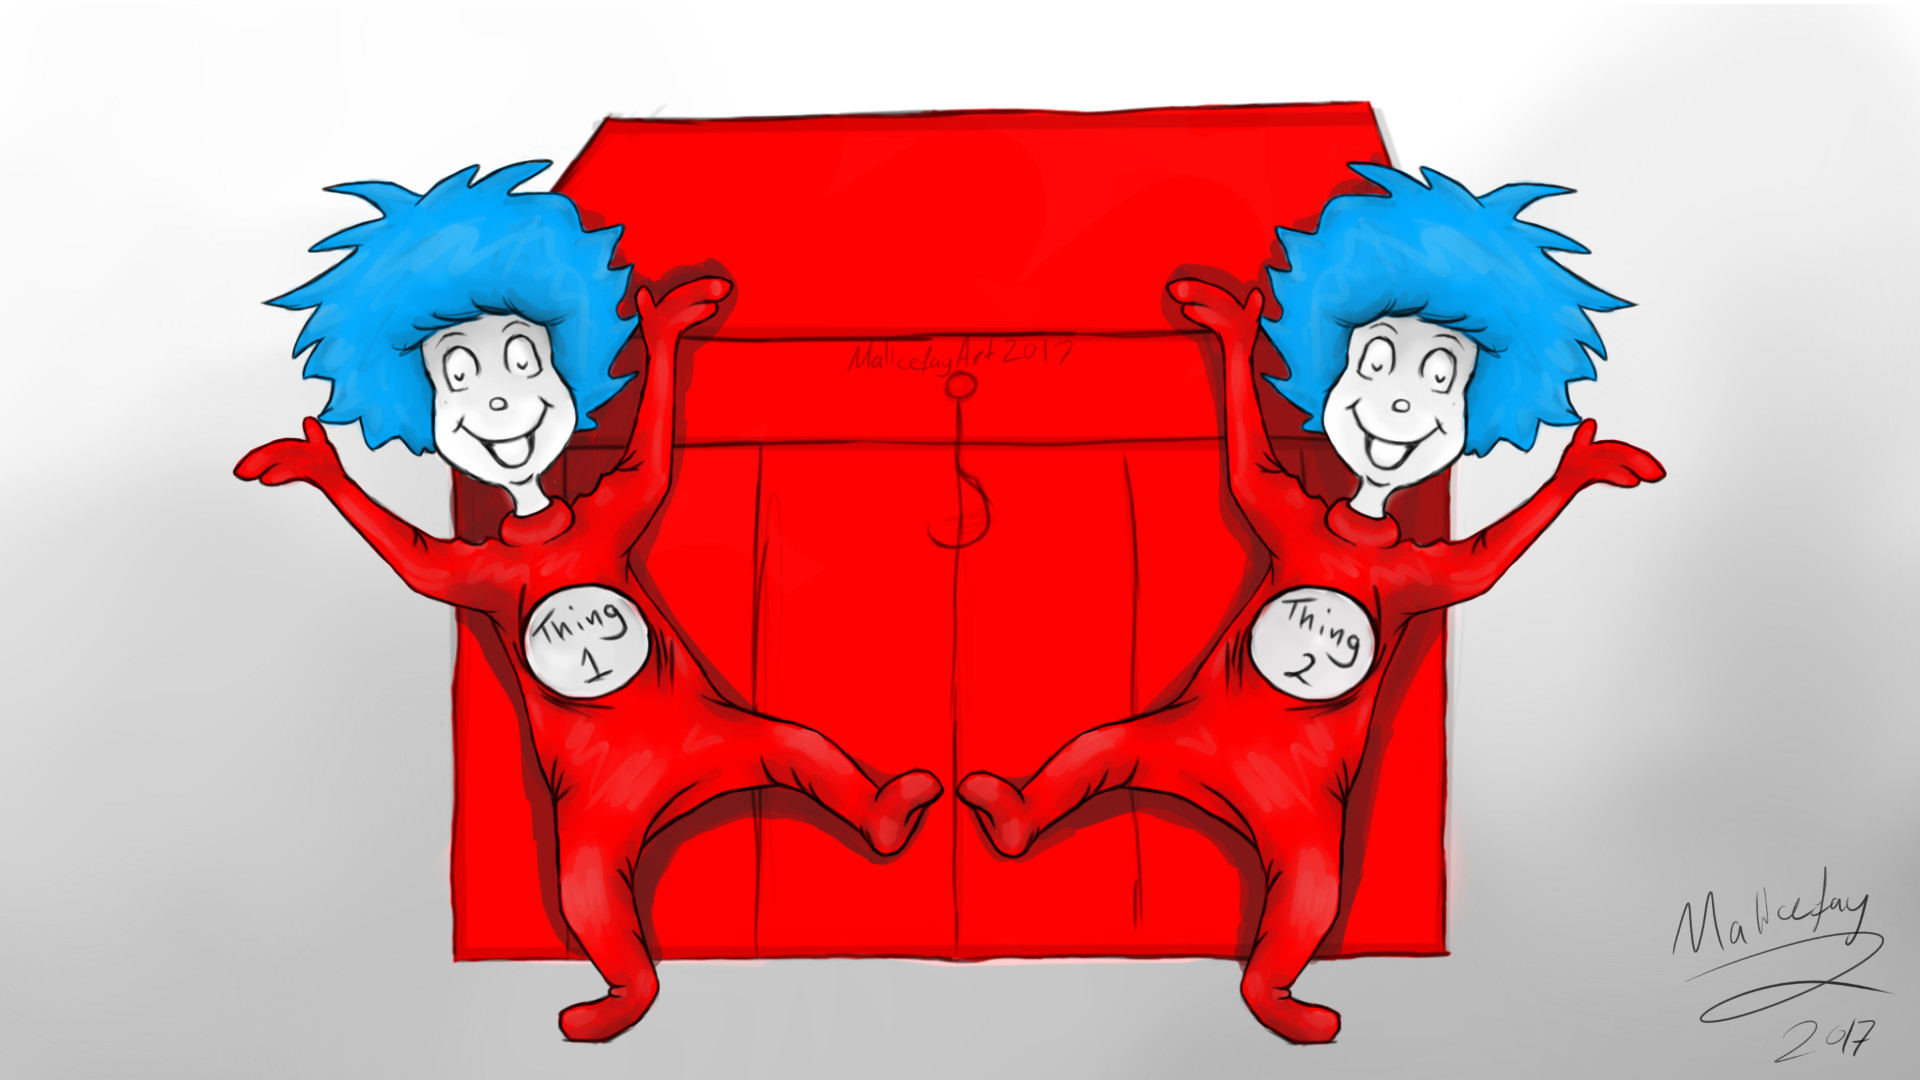 Aggregate more than 52 thing 1 and thing 2 wallpaper  incdgdbentre